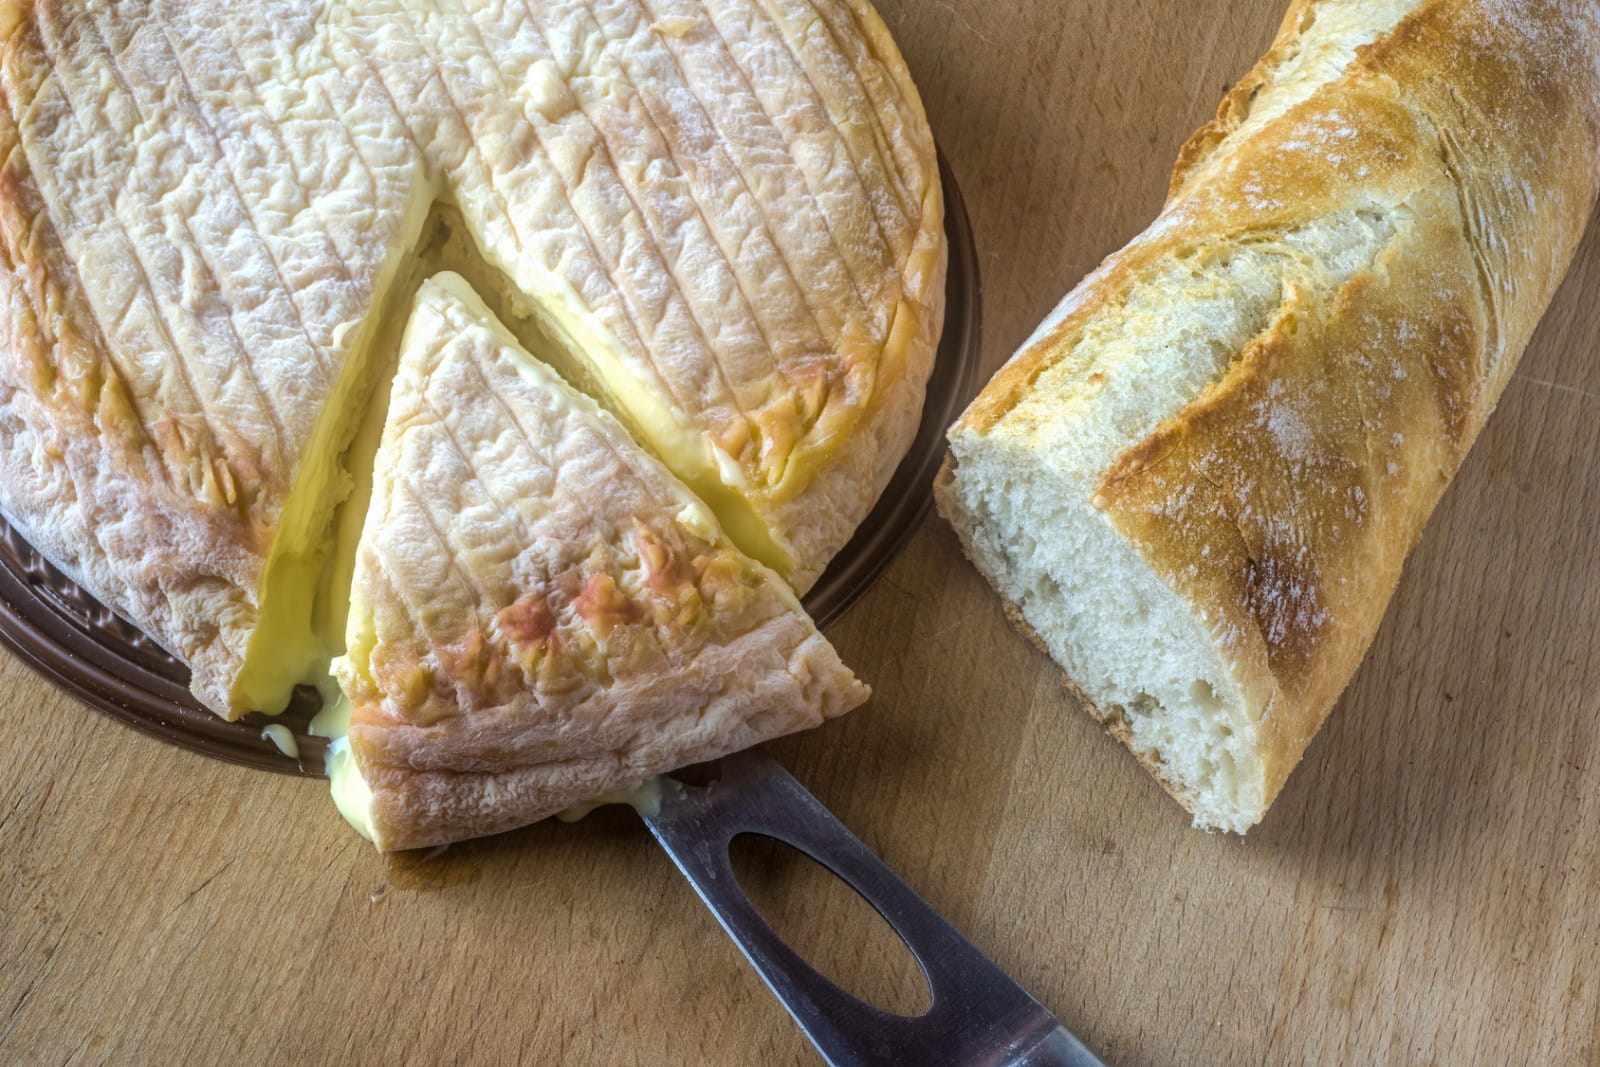  What to pair with Epoisses (and other stinky cheeses)